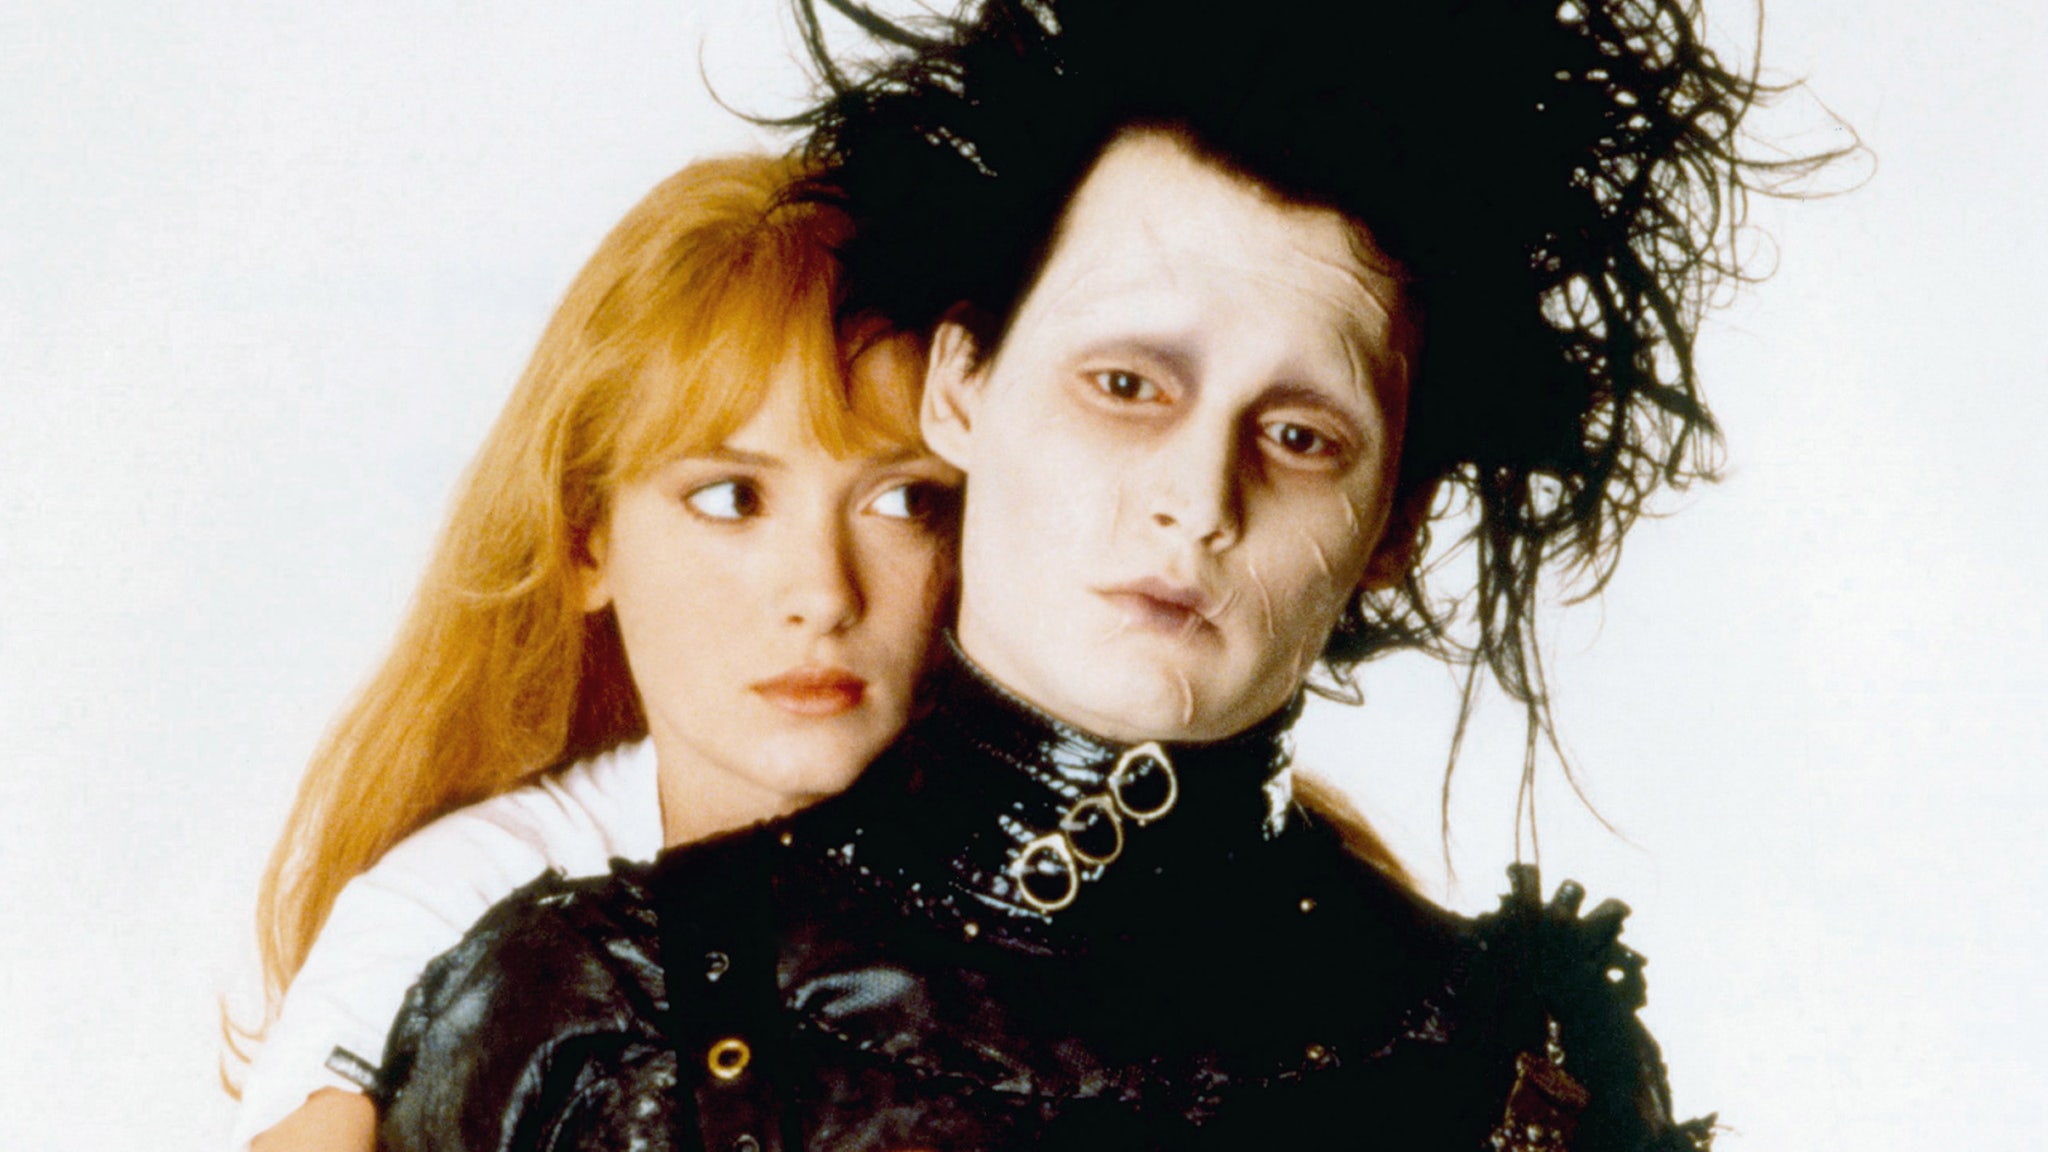 Edward Scissorhands Turns 30 -- See What the Cast Looks Like Now!